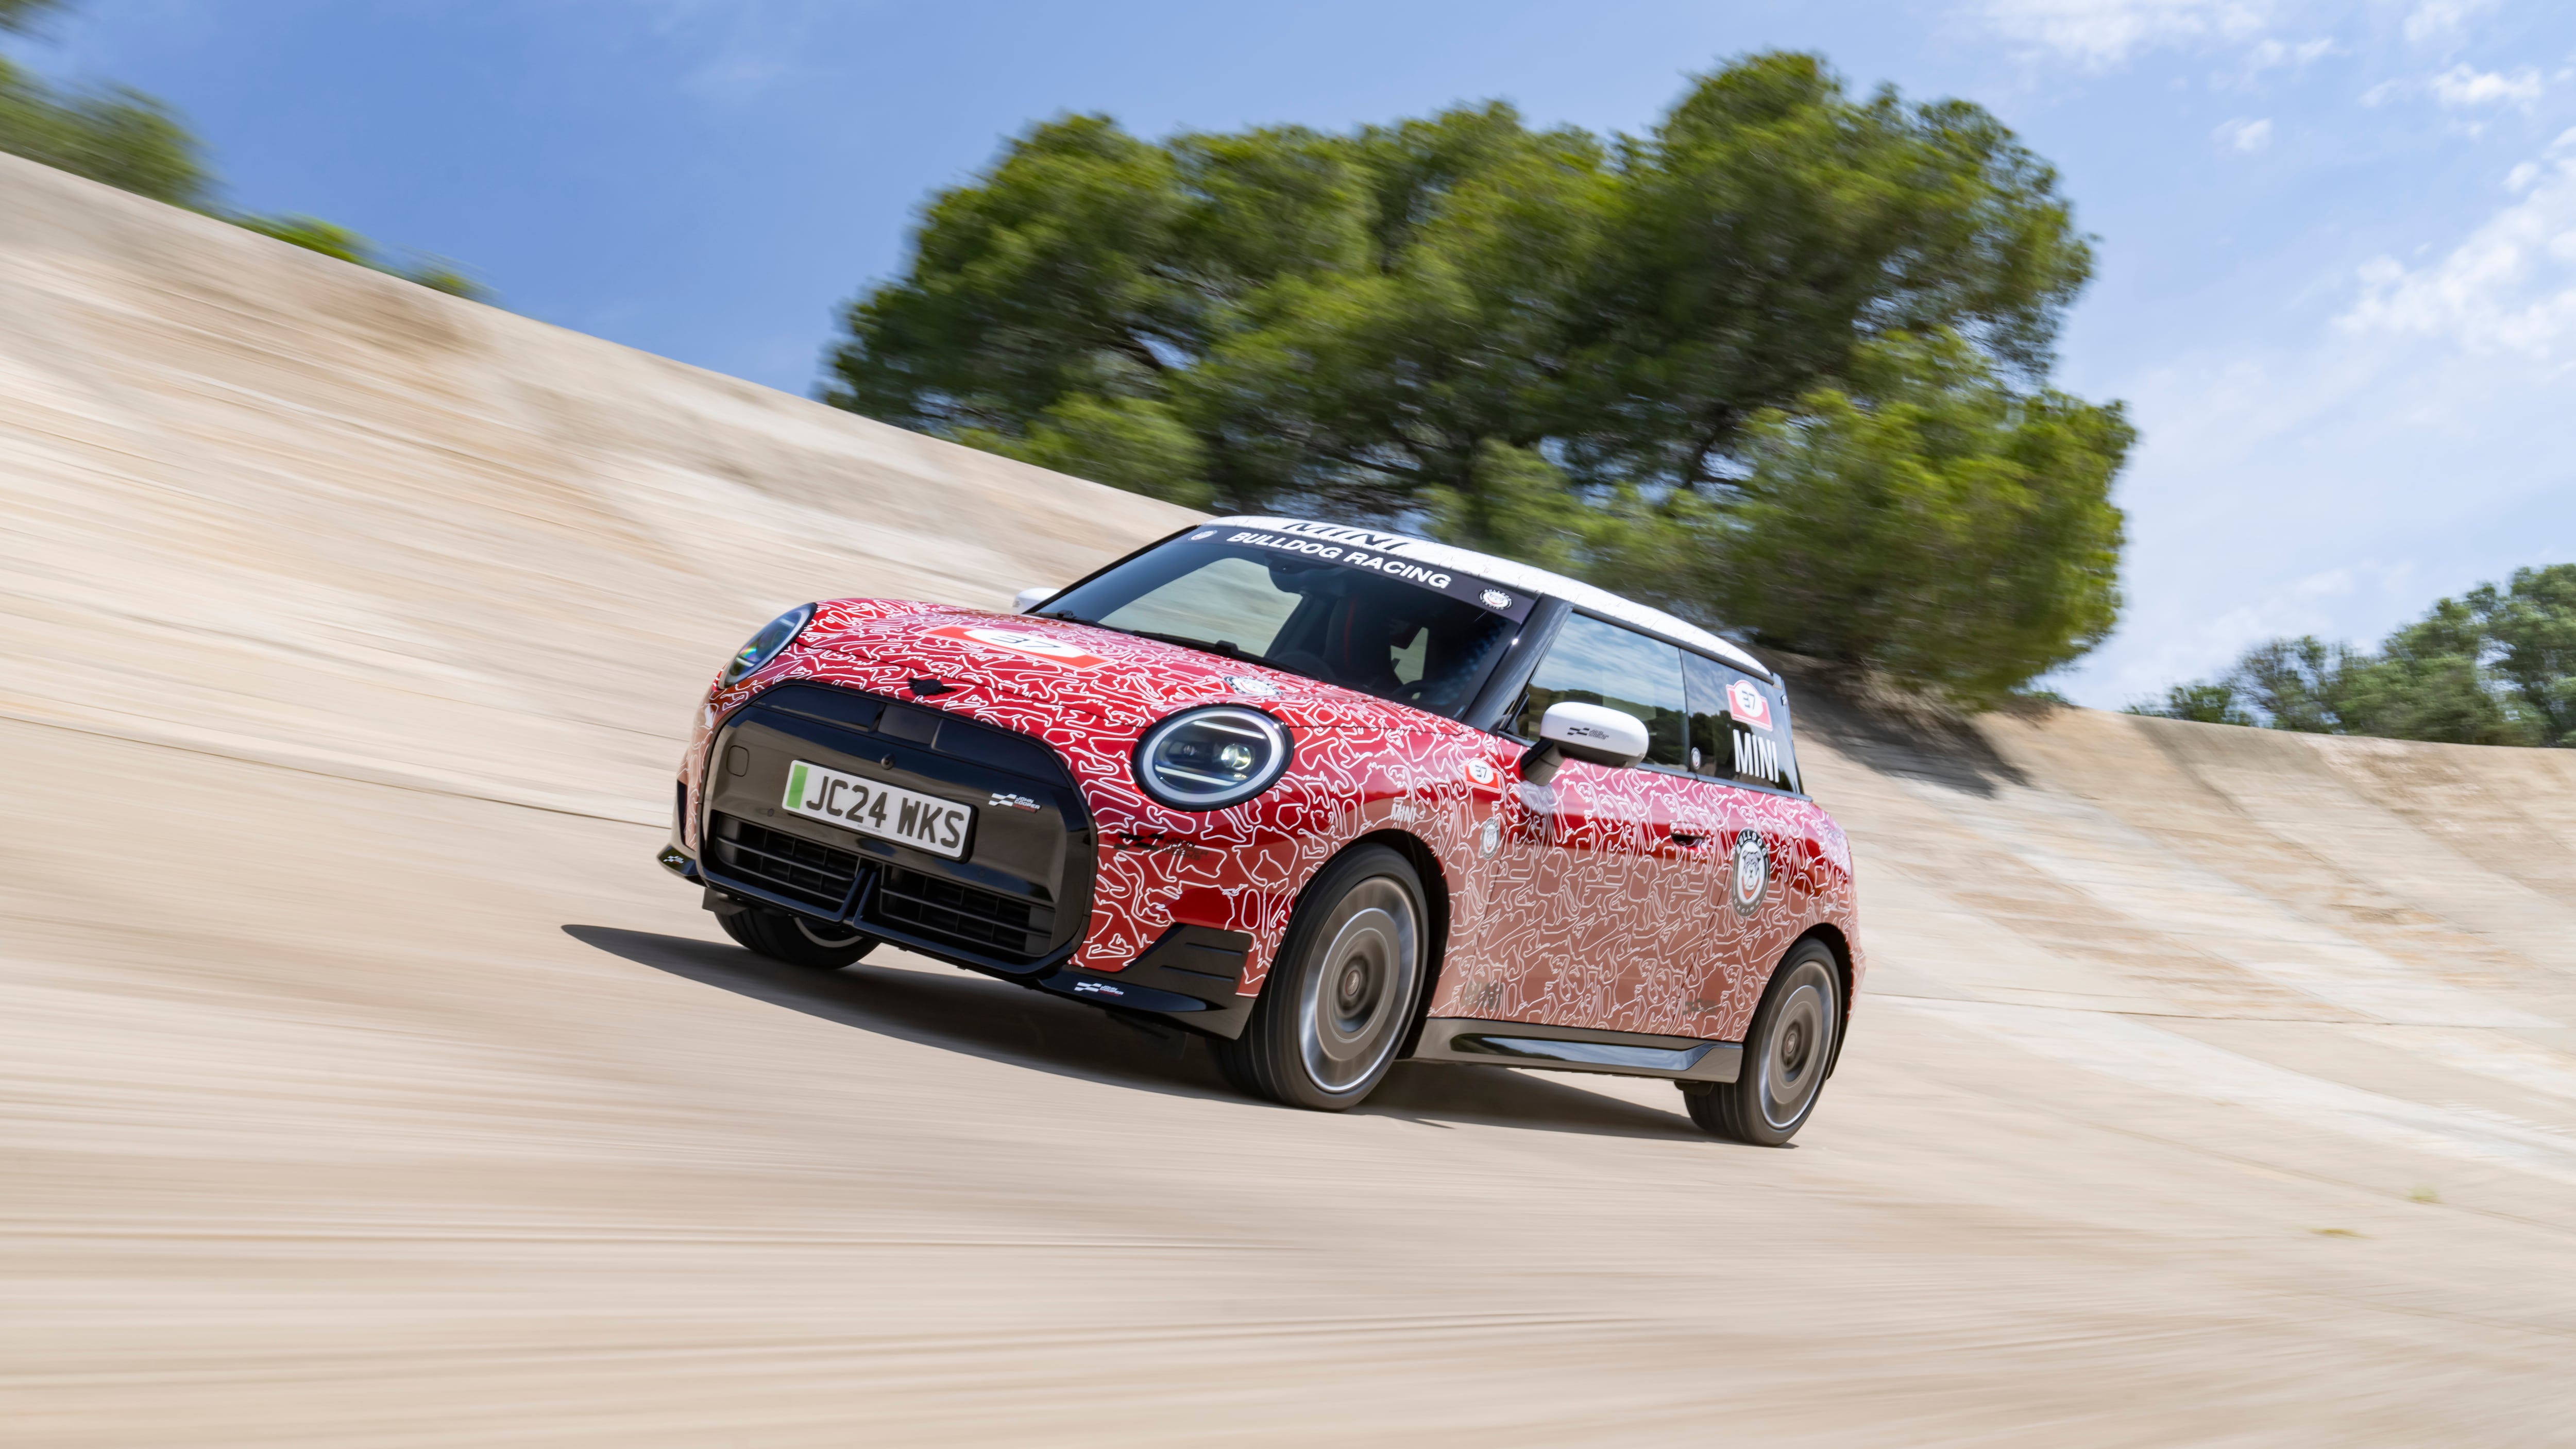 The prototype version of Mini’s latest hot hatchback will debut at Goodwood Festival of Speed. (Mini)